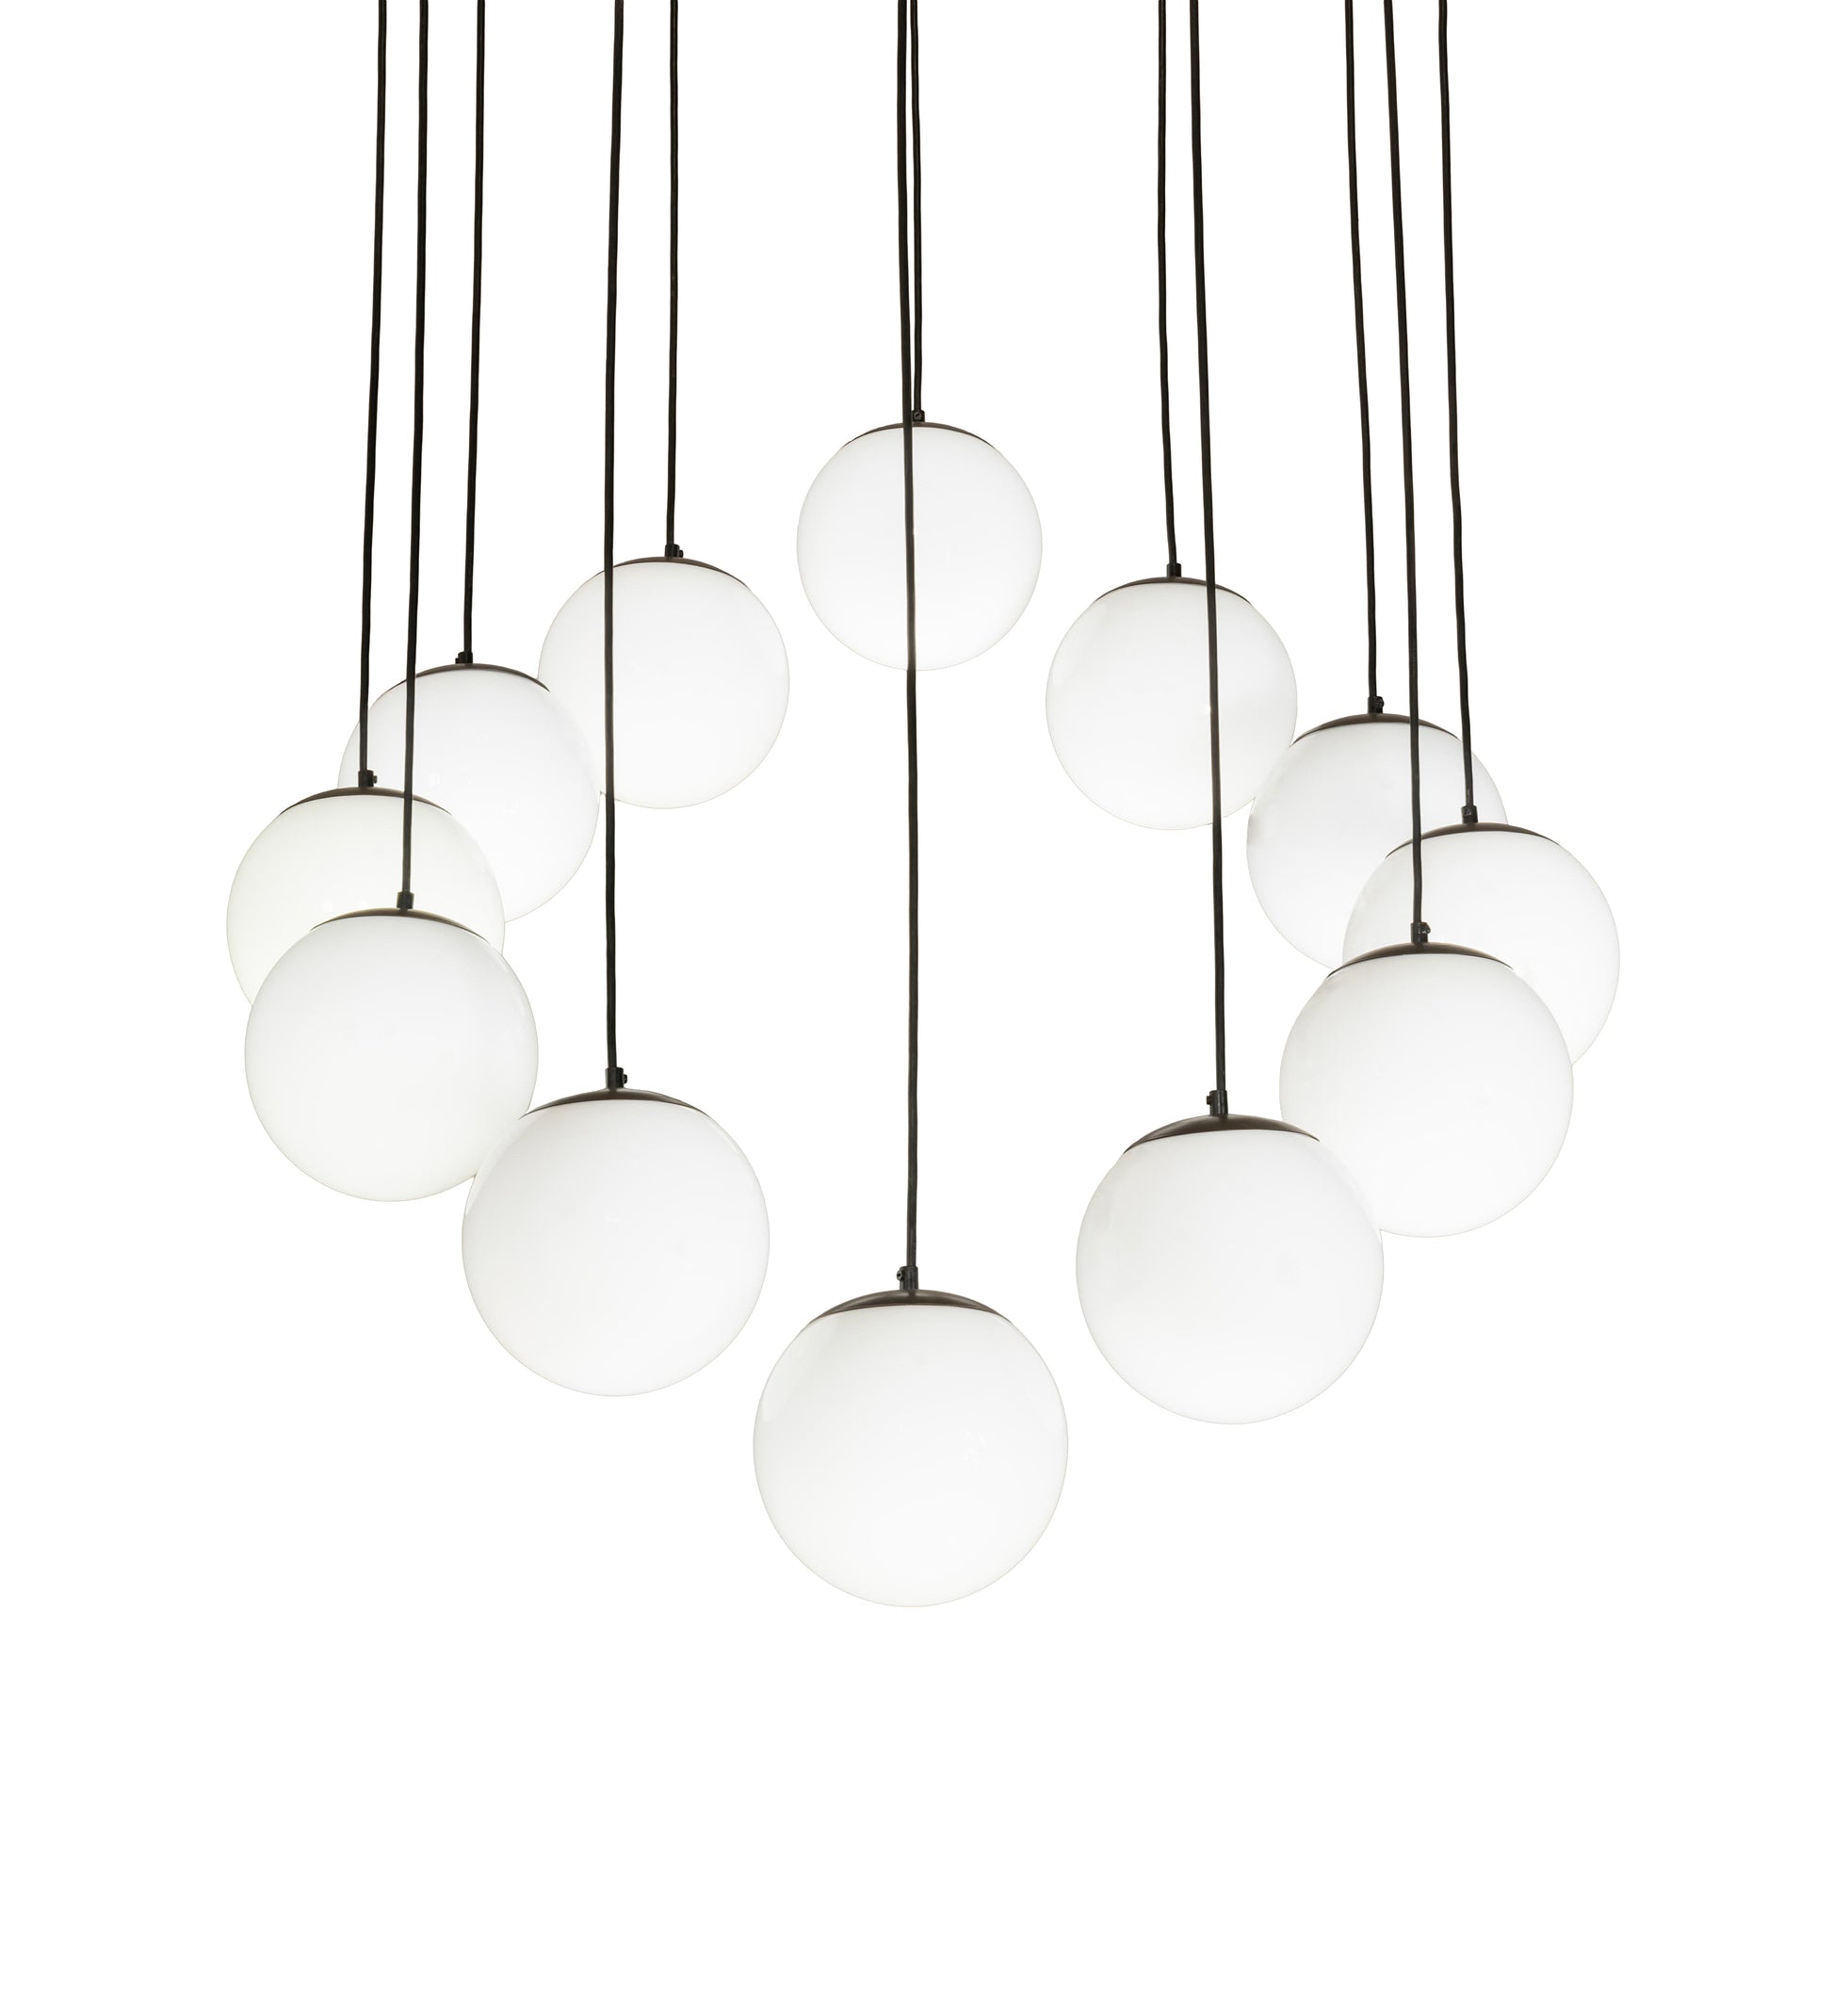 40" Bola Cascading Pendant by 2nd Ave Lighting